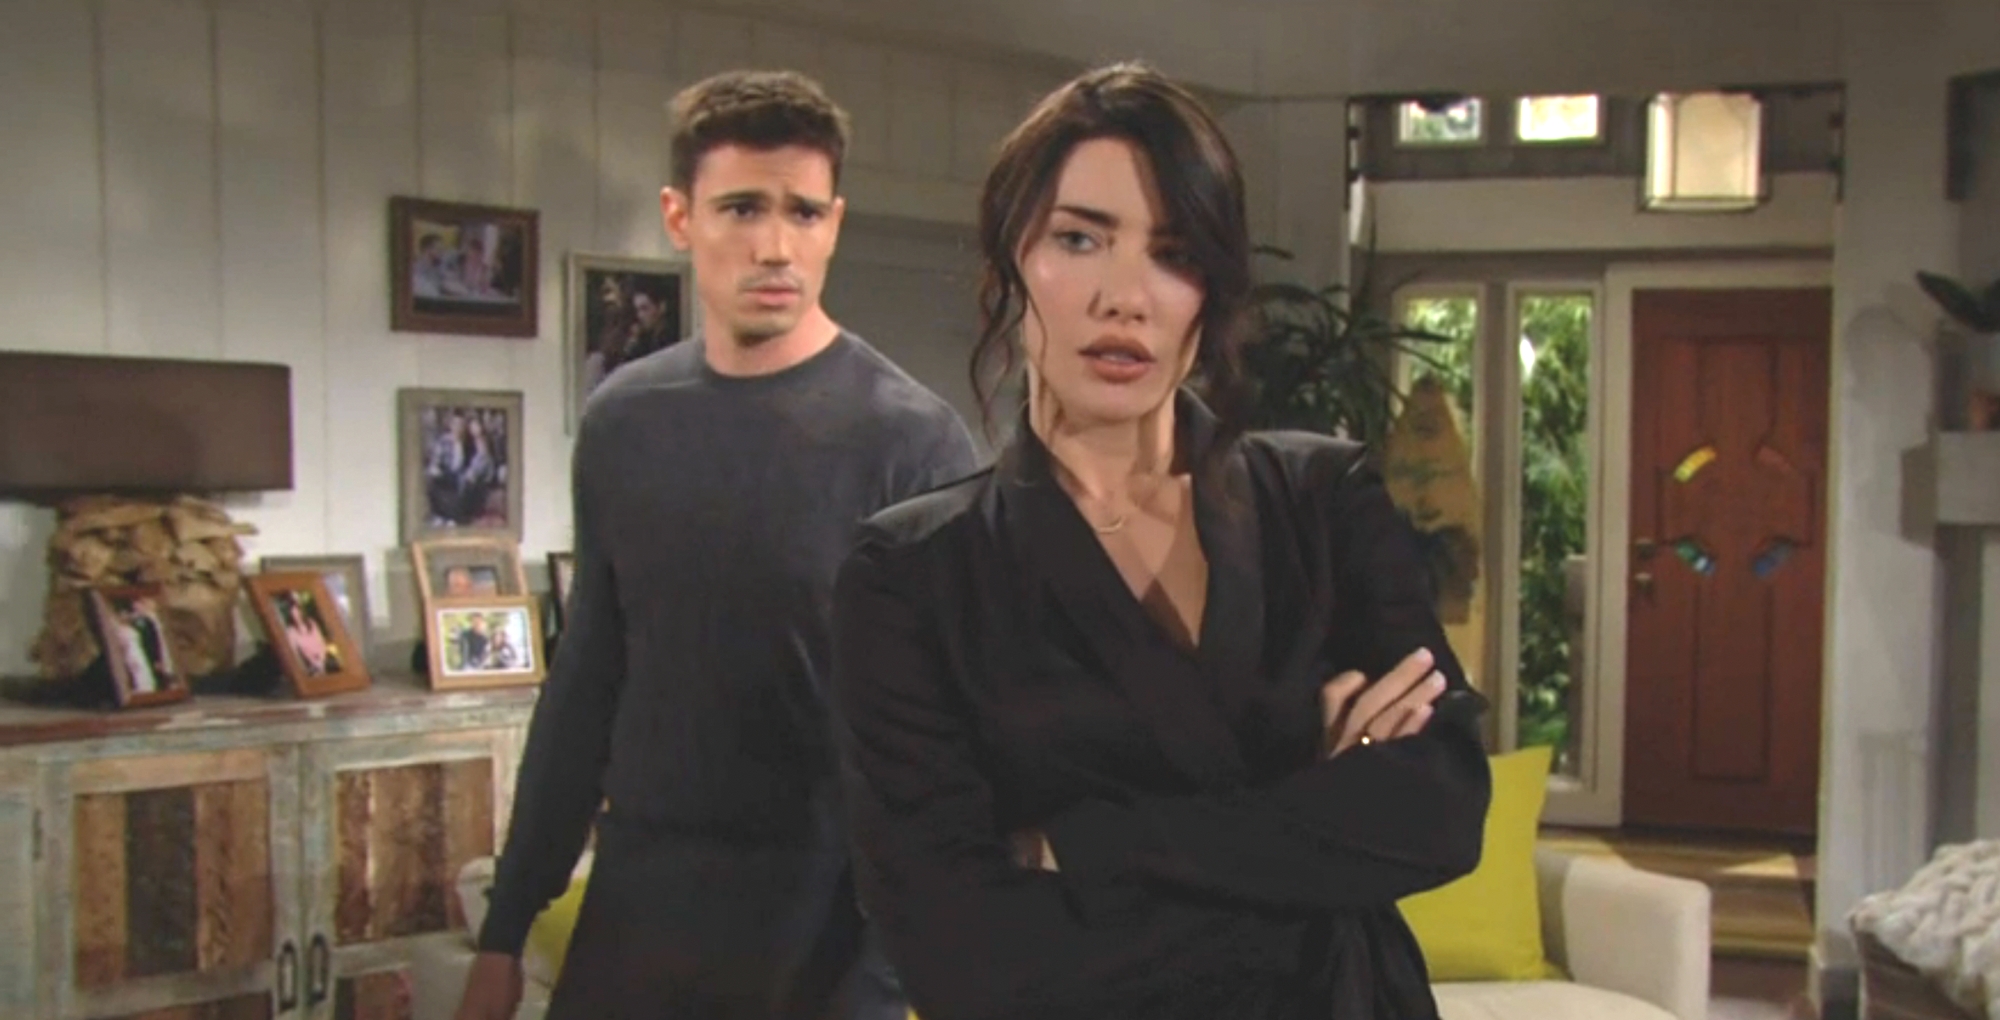 the bold and the beautiful recap for tuesday, february 14, 2023 finn finnegan is blindsided by steffy's revelation